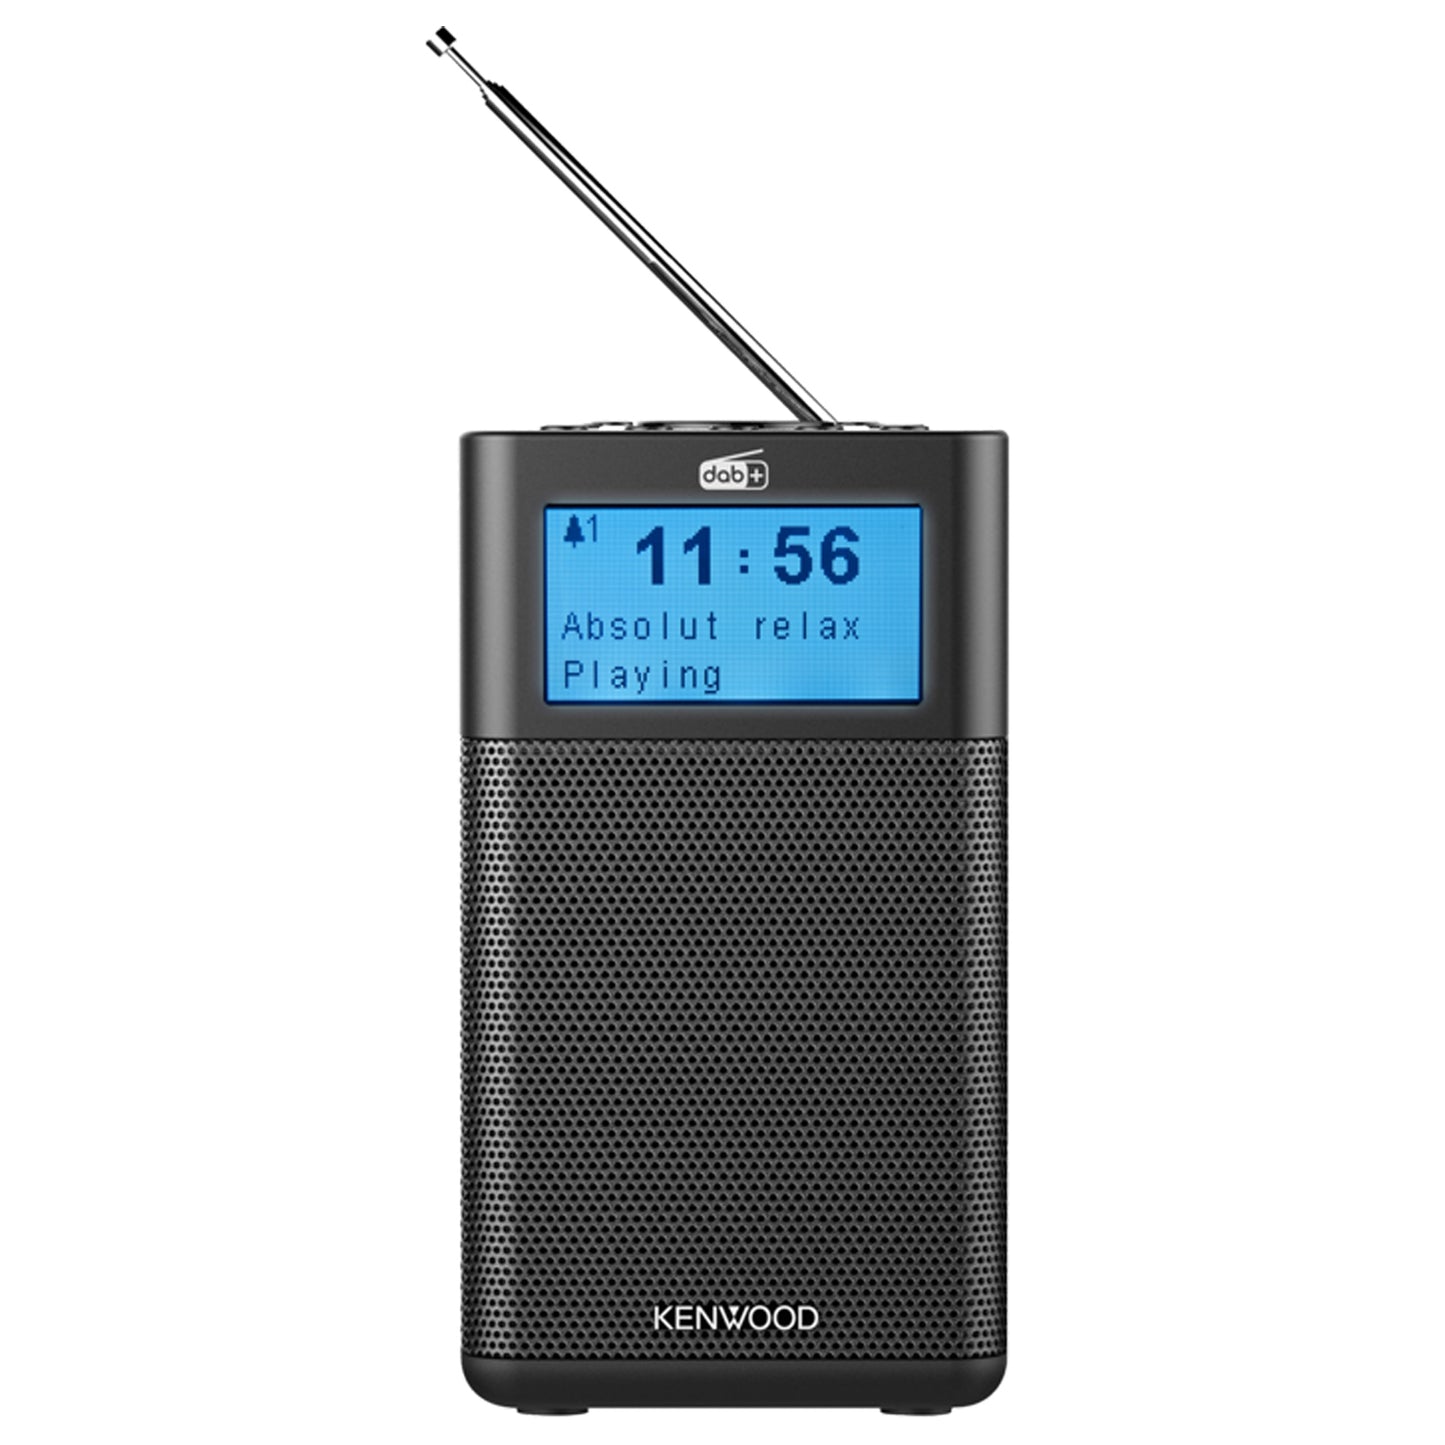 KENWOOD Portable FM/DAB radio with display, bluetooth speaker with metal grill, aux source with 3.5mm jack, integrated alarm function